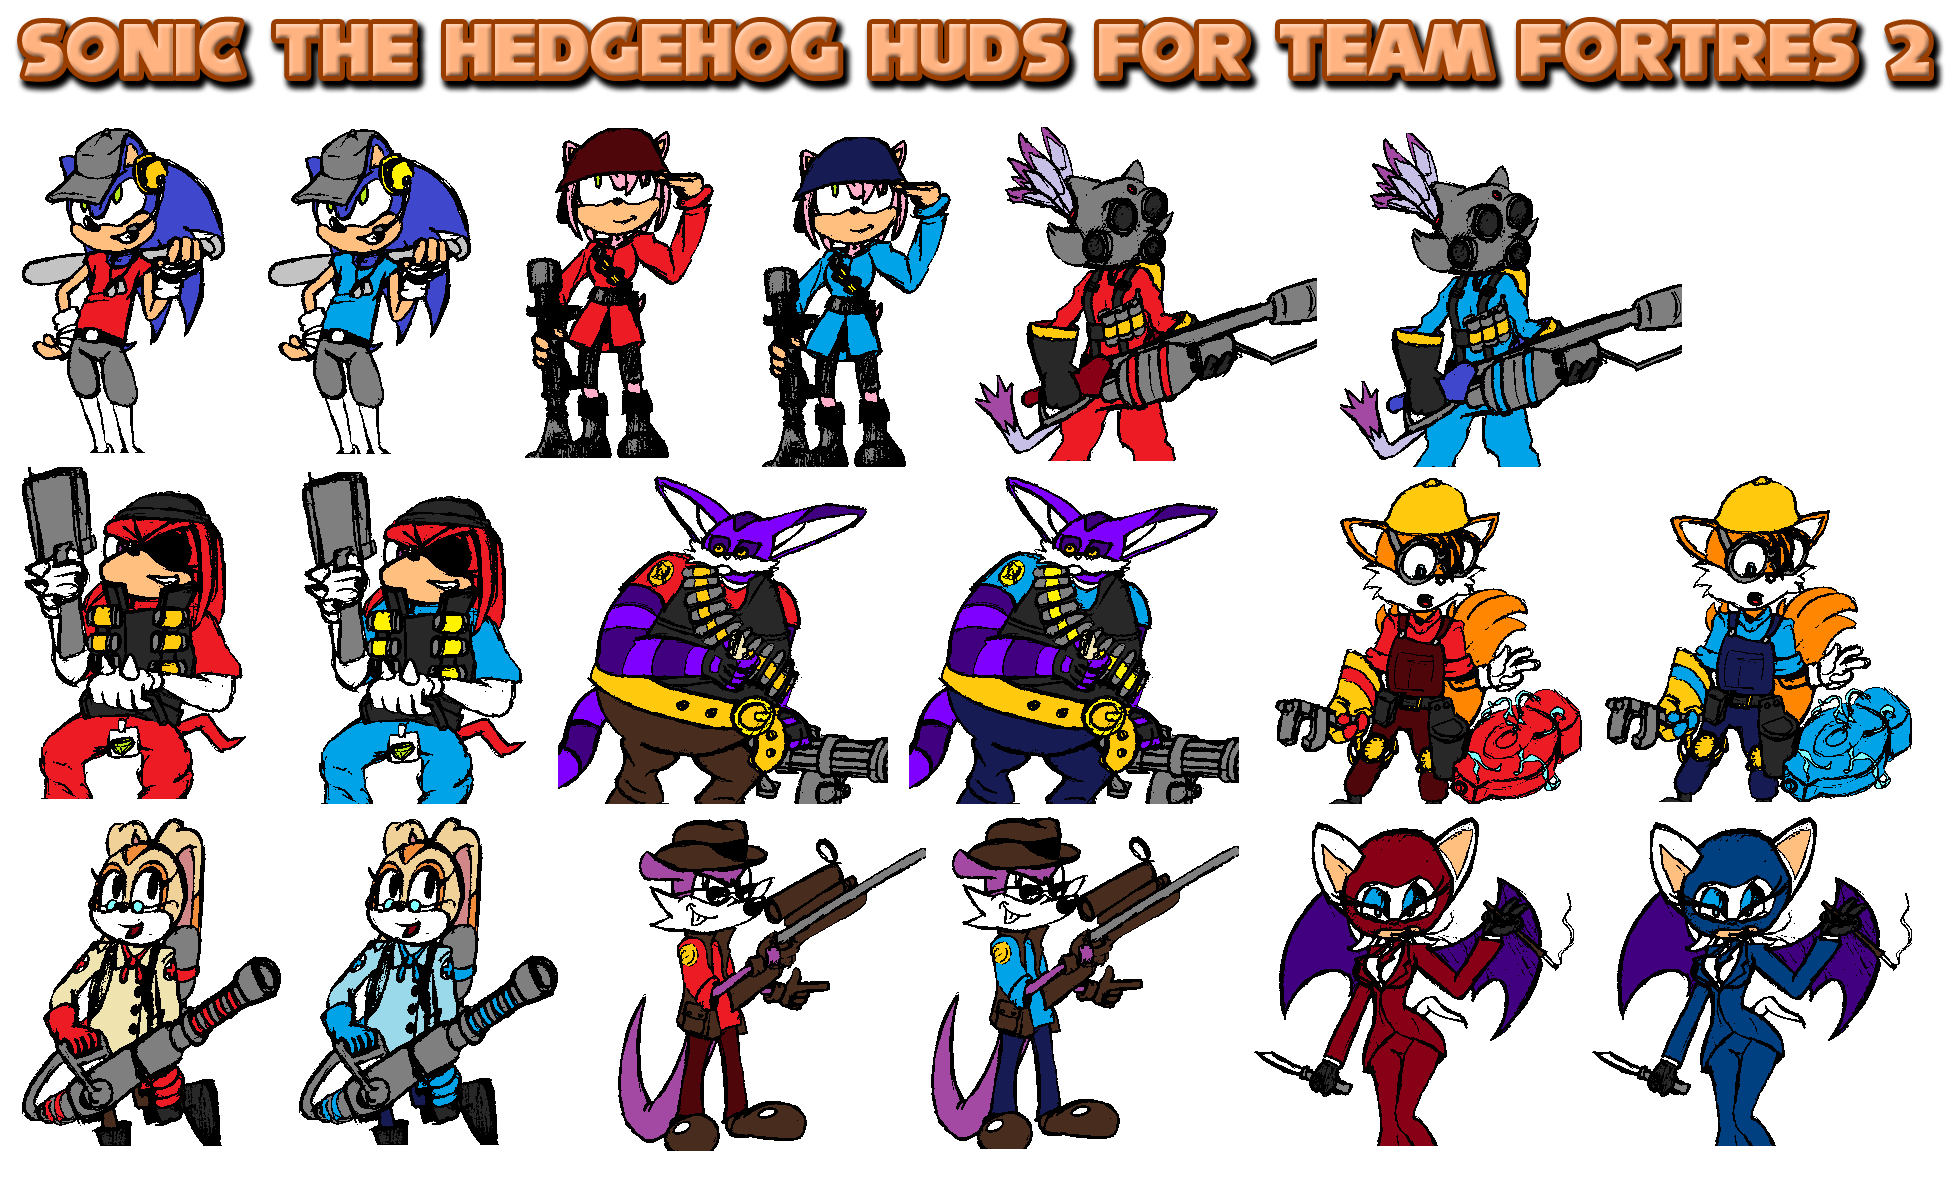 Sonic The Hedgehog Huds For Tf2 By Erichgrooms3 On Deviantart. black kitche...